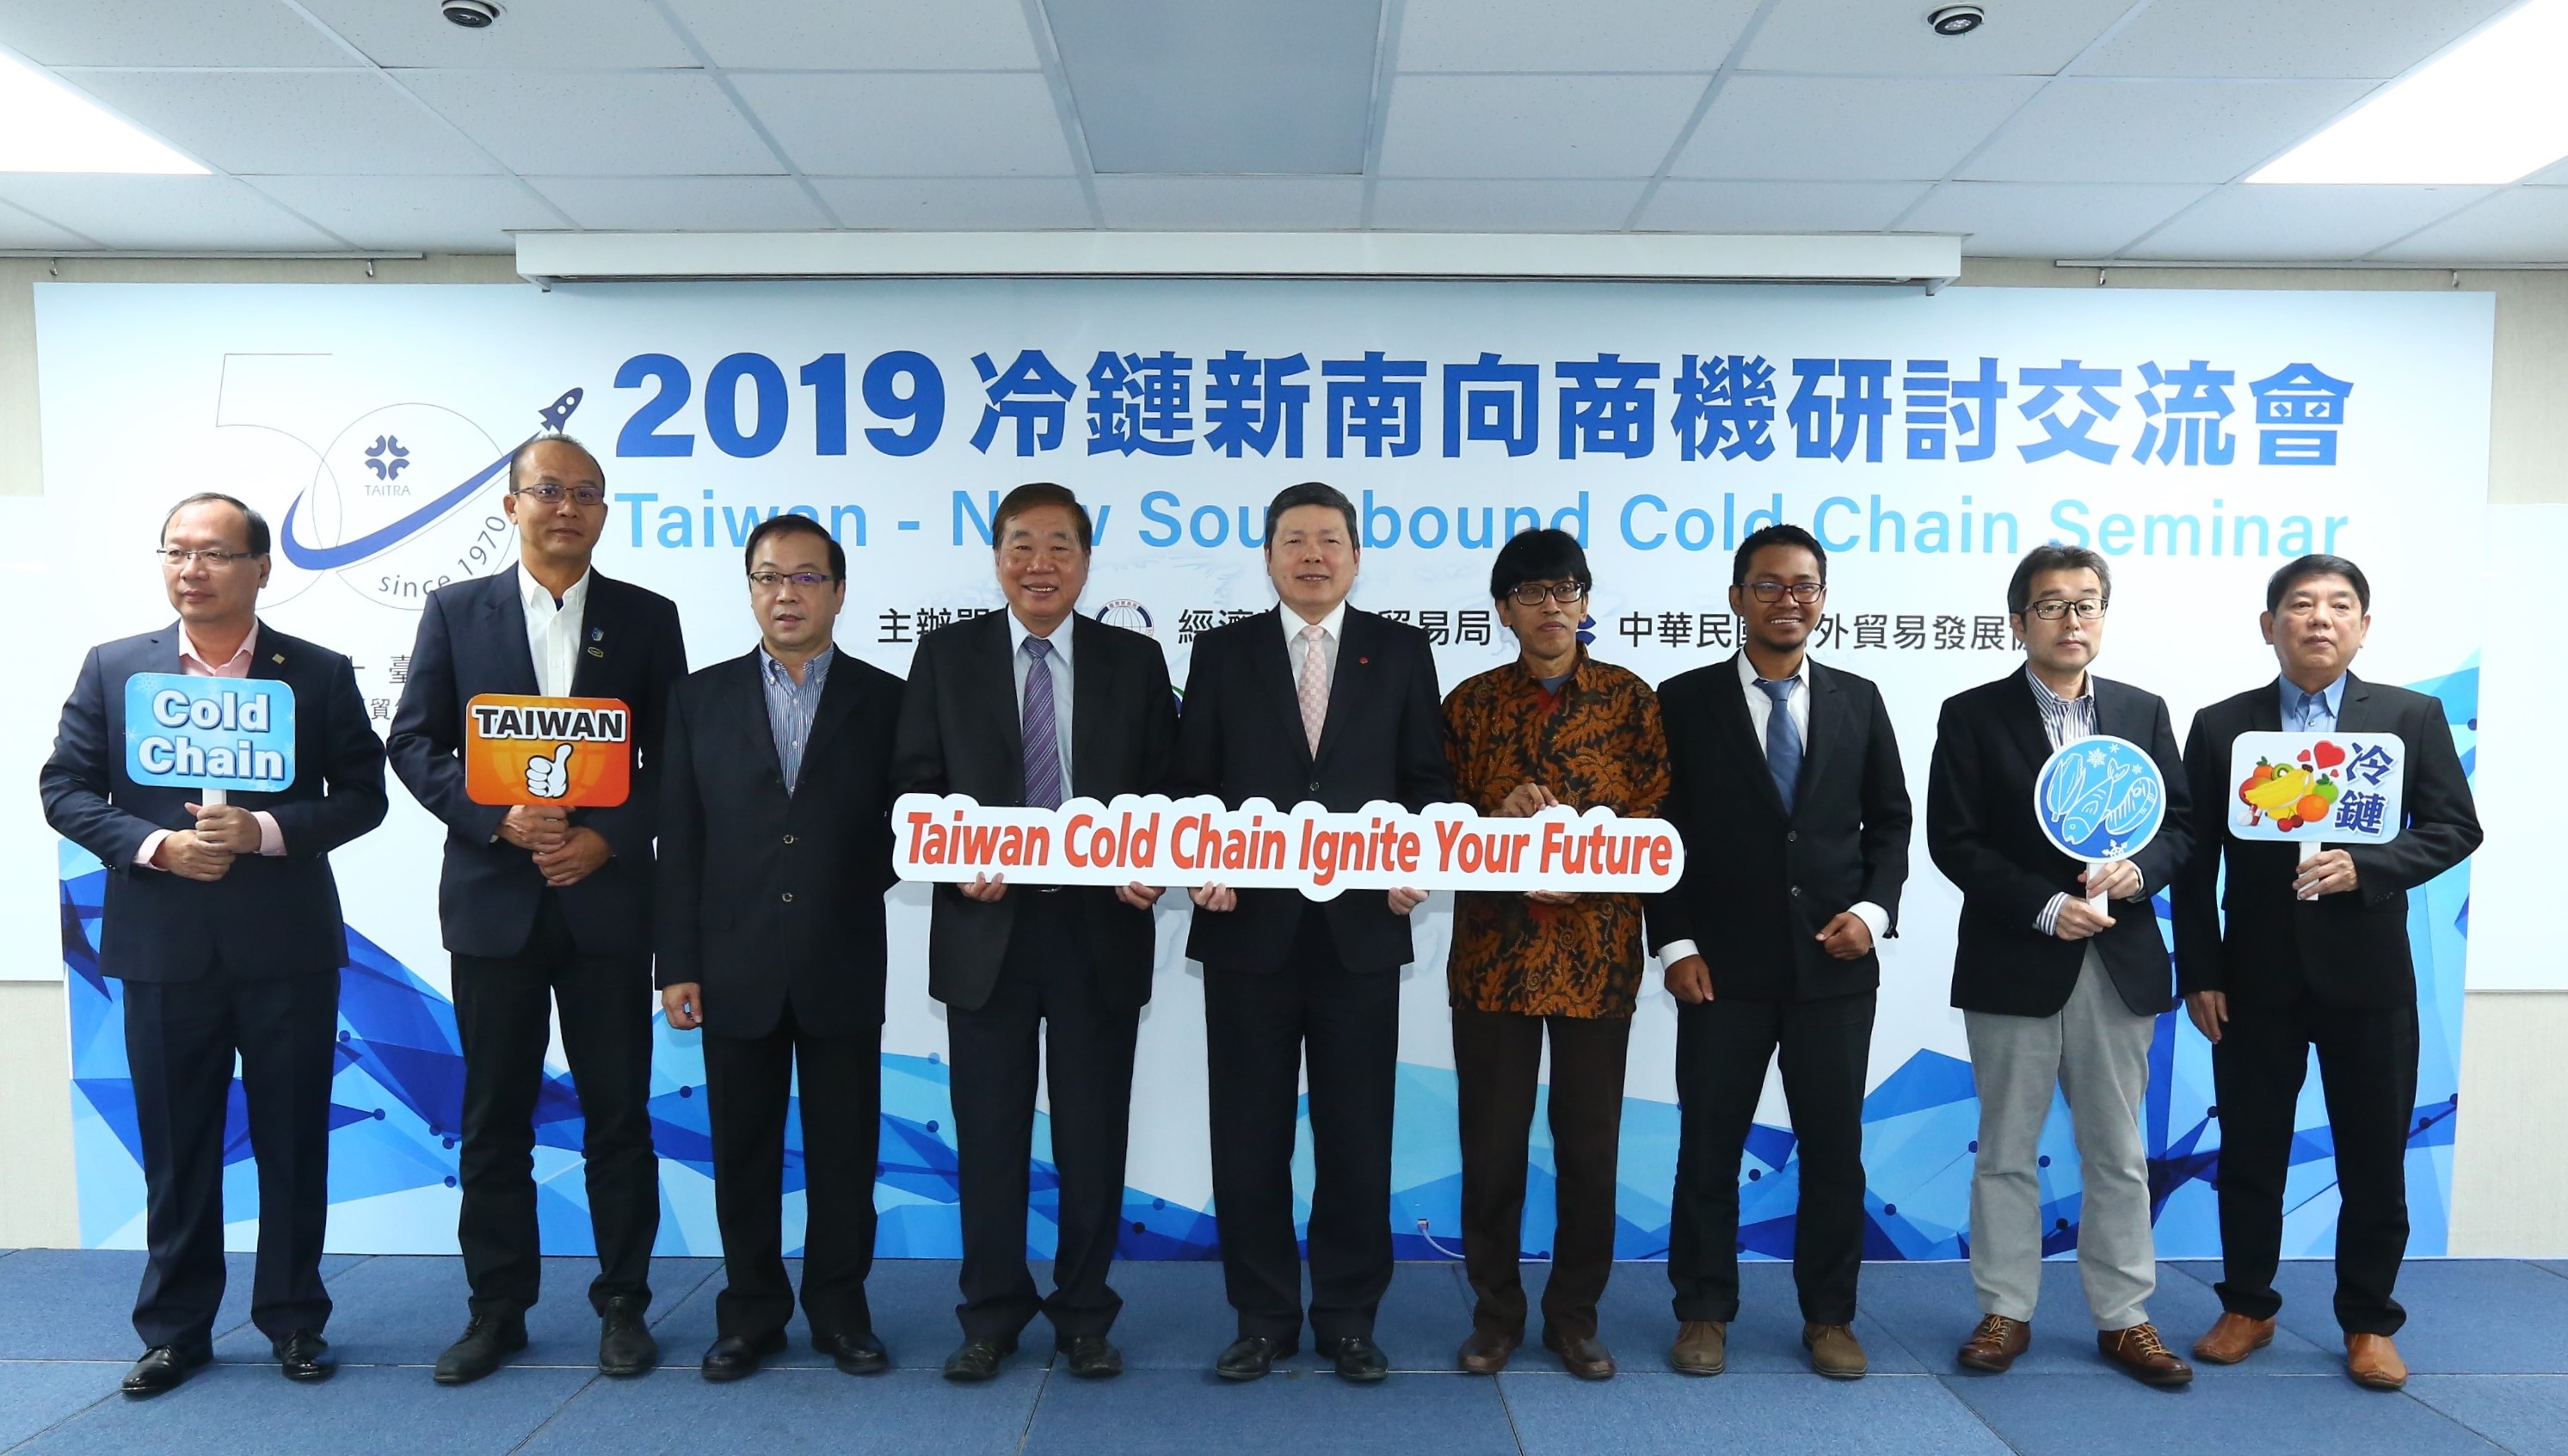 TAITRA (Taiwan External Trade Development Council), supported by the Bureau of Foreign Trade, cooperated with Taiwan Cold Chain Association and Taiwan Association of Logistics Management to handle 